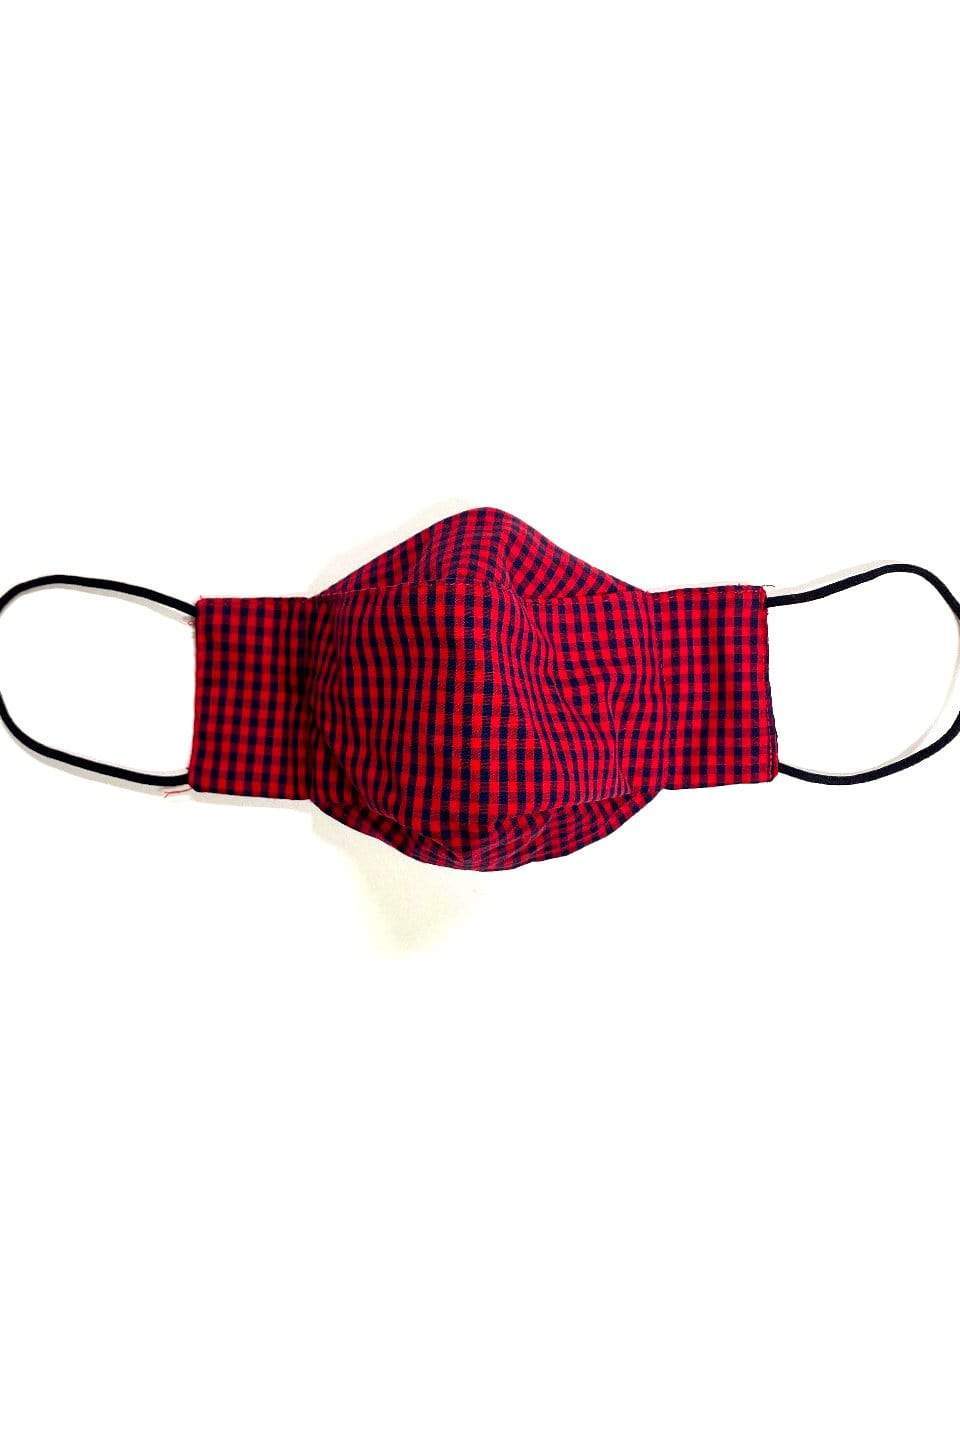 Box Pleated Face Masks Red And Black Gingham (Box Pleated Mask With Filter Pocket) - Chloe Dao